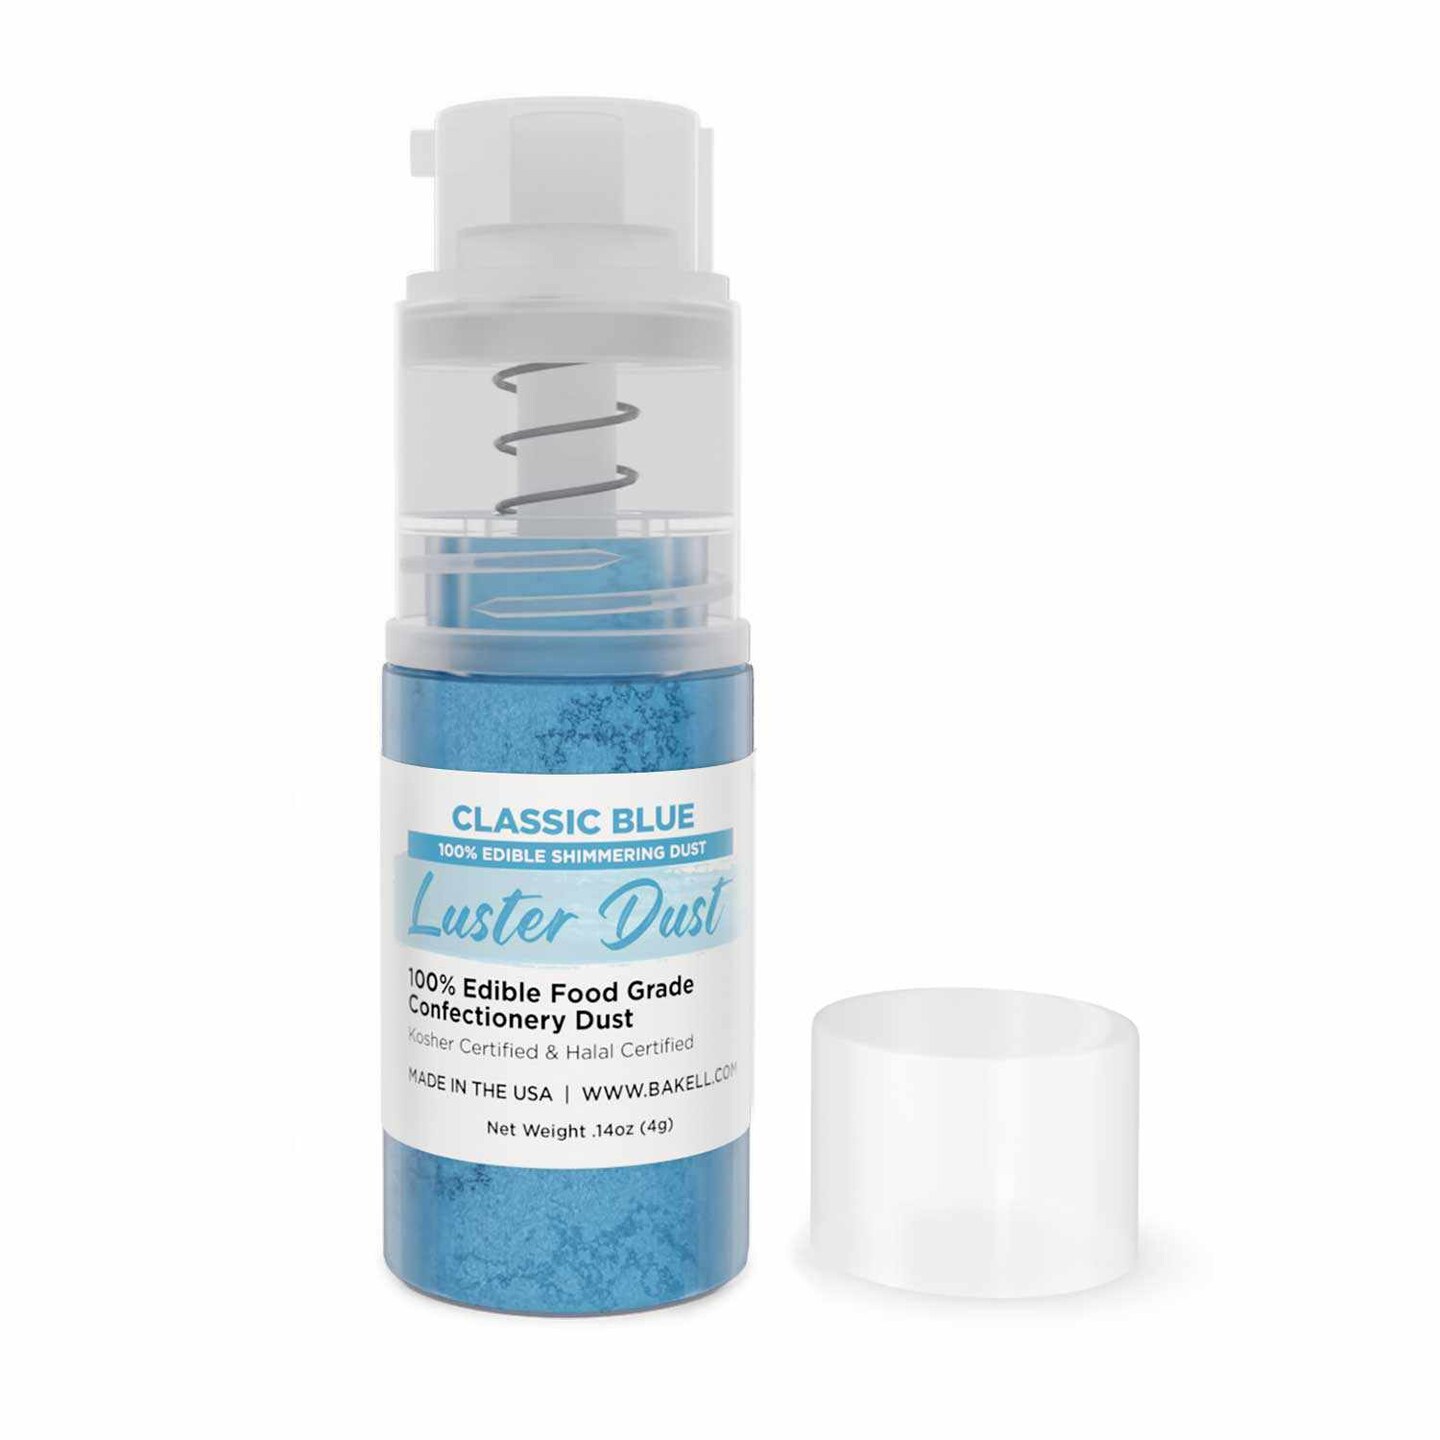 Classic Blue Luster Dust Spray | Luster Dust Edible Glitter Spray Dust for Cakes, Cookies, Desserts, Paint. FDA Compliant (4 Gram Pump)